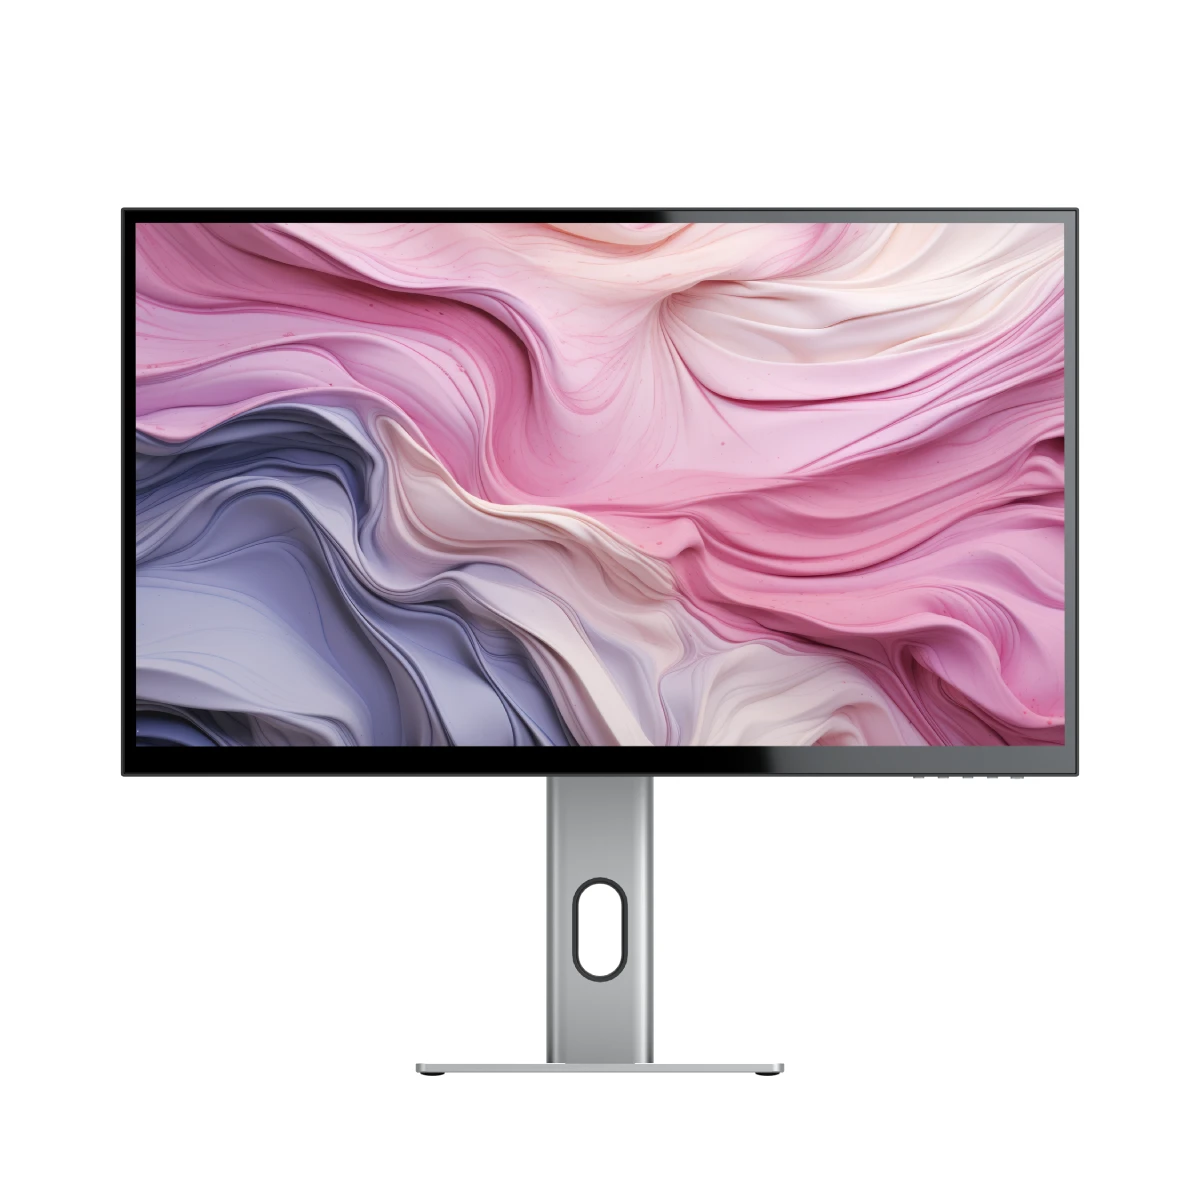 CLARITY 27" UHD 4K Monitor (Pack of 2)